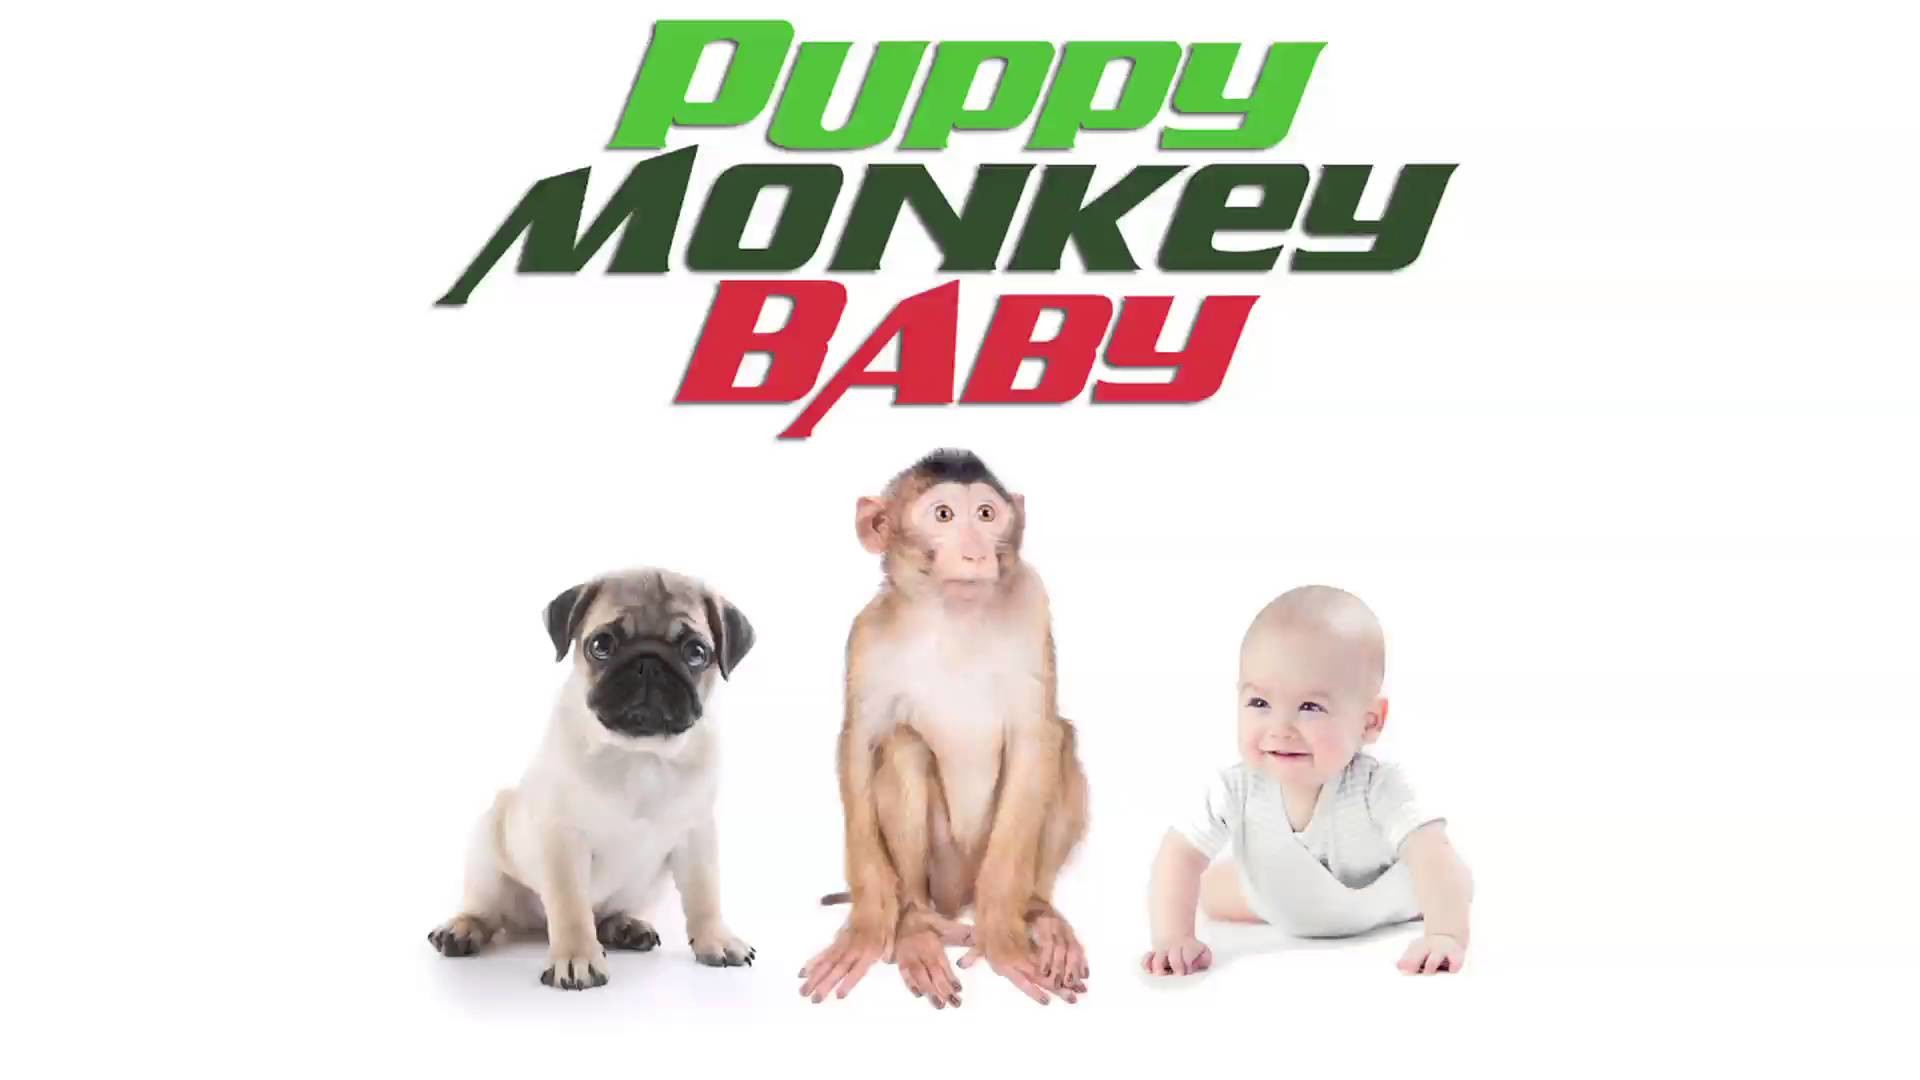 1920x1080 "PUPPY MONKEY BABY" - MOUNTAIN DEW TV COMMERCIAL TRIBUTE - YouTube